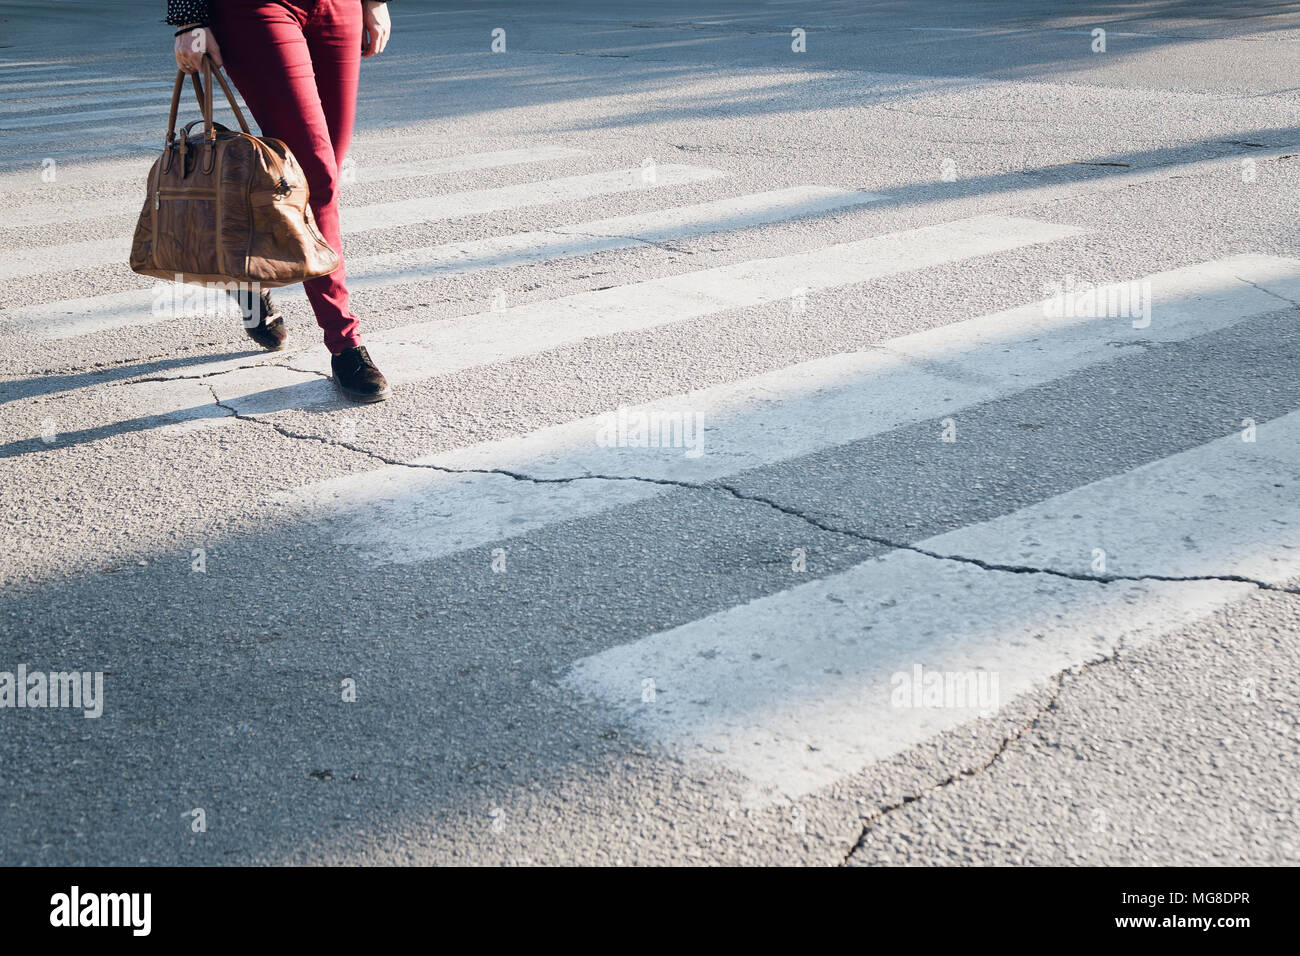 The woman with brown leather bag crosses a pedestrian crossing Stock Photo